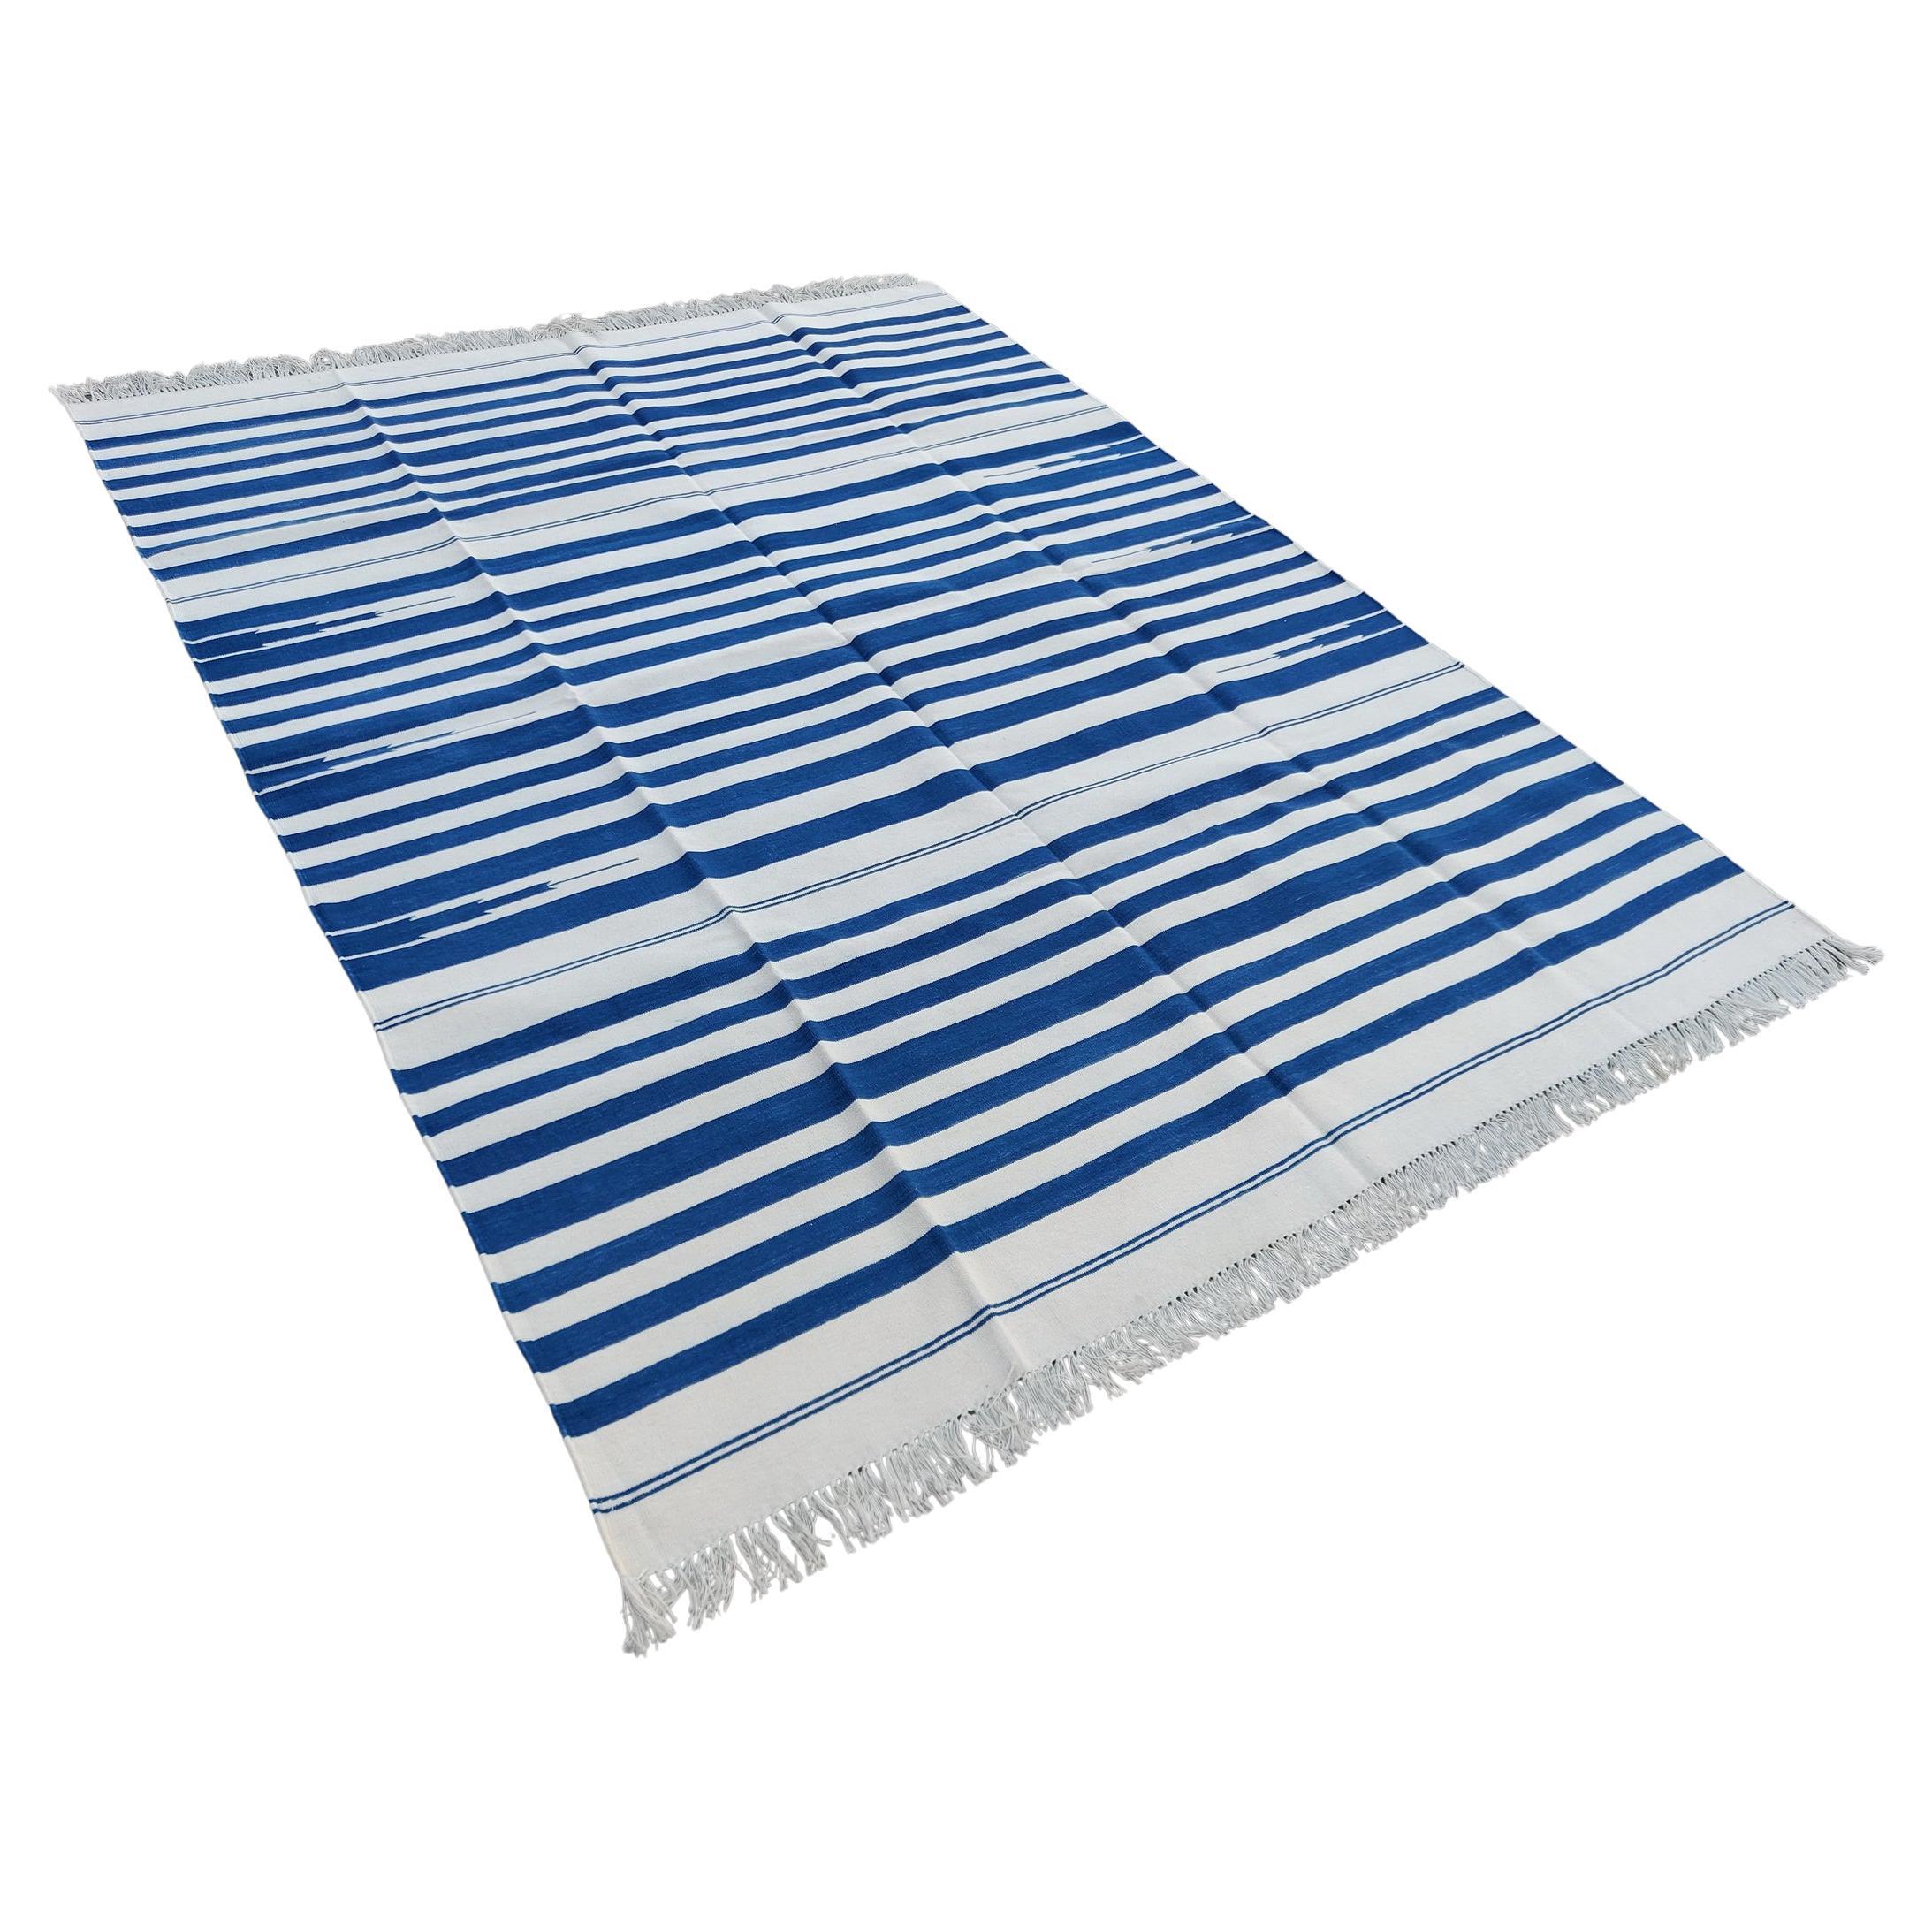 Handmade Cotton Area Flat Weave Rug, 6x8 Blue And White Striped Indian Dhurrie For Sale